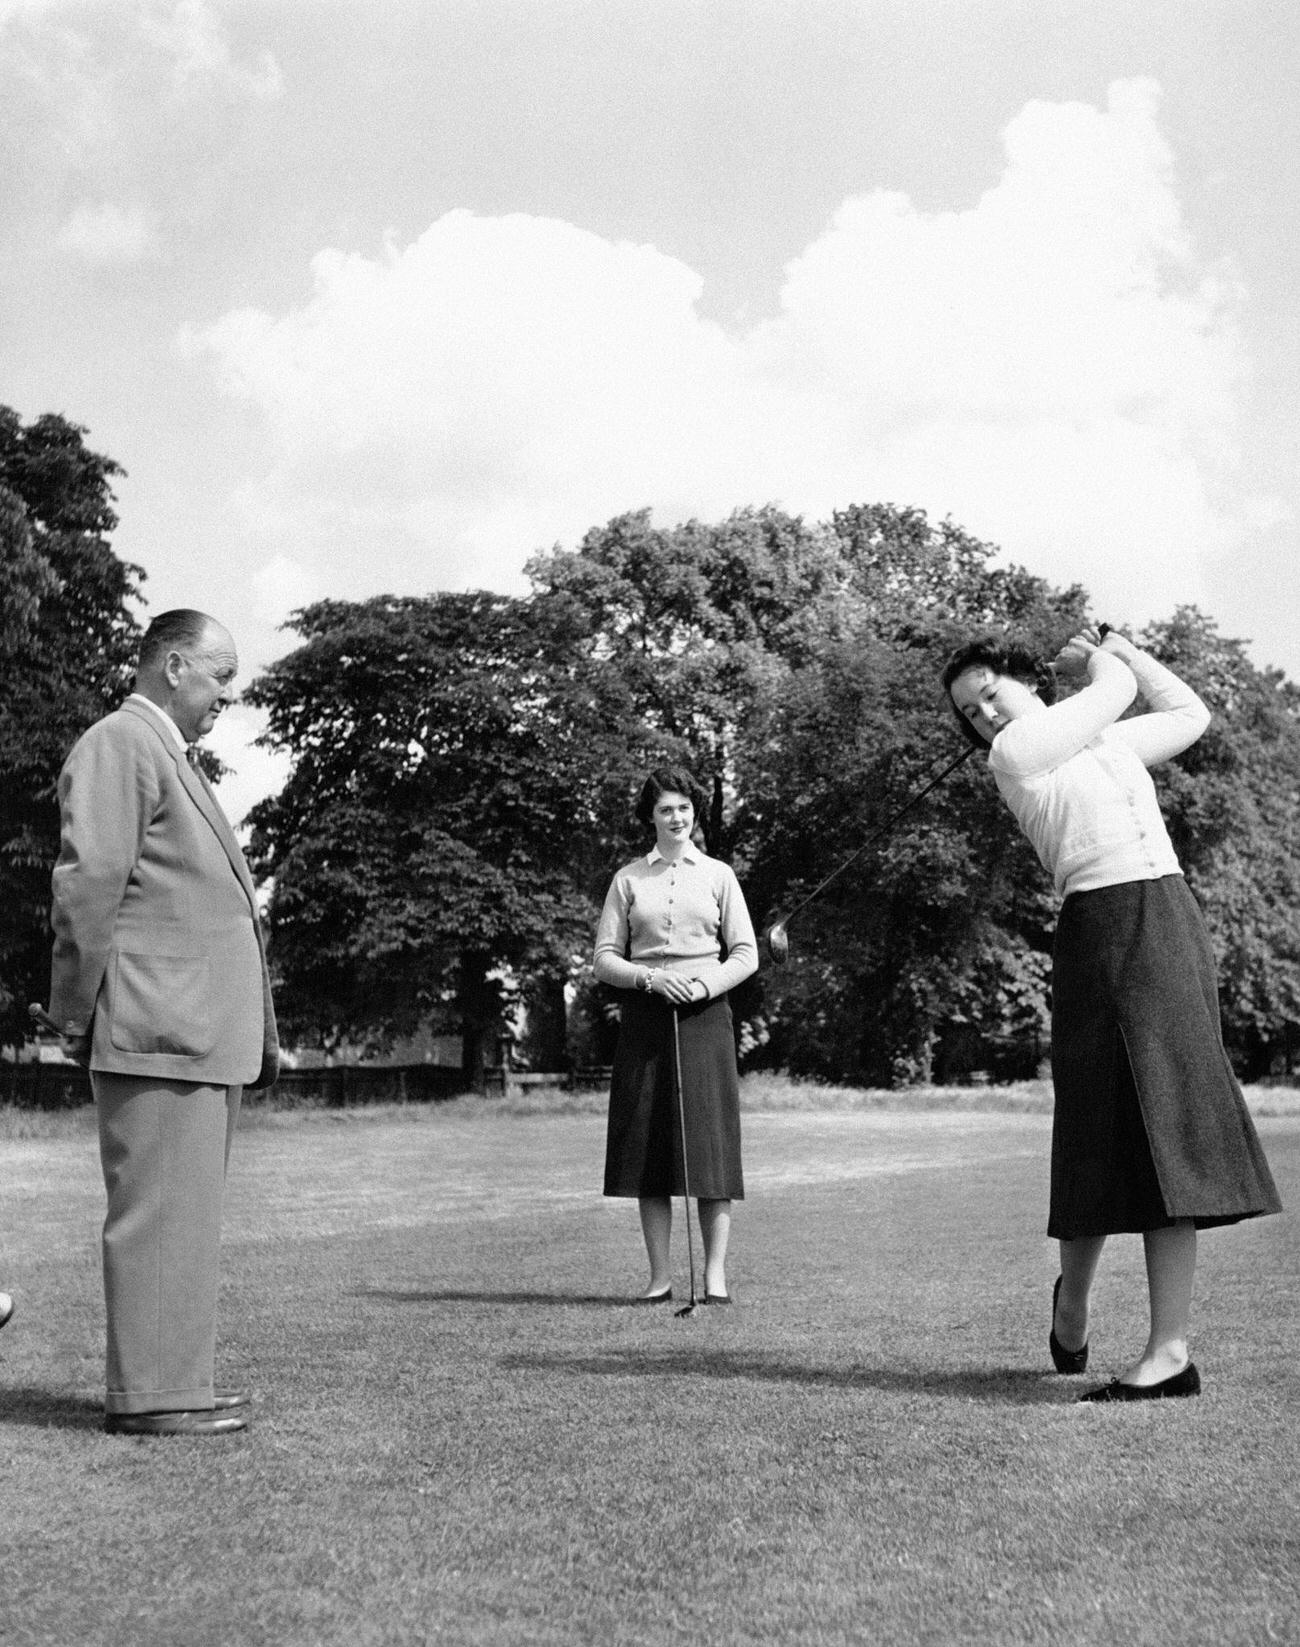 Young women learning golf at 'Cygnets House,' London, UK.